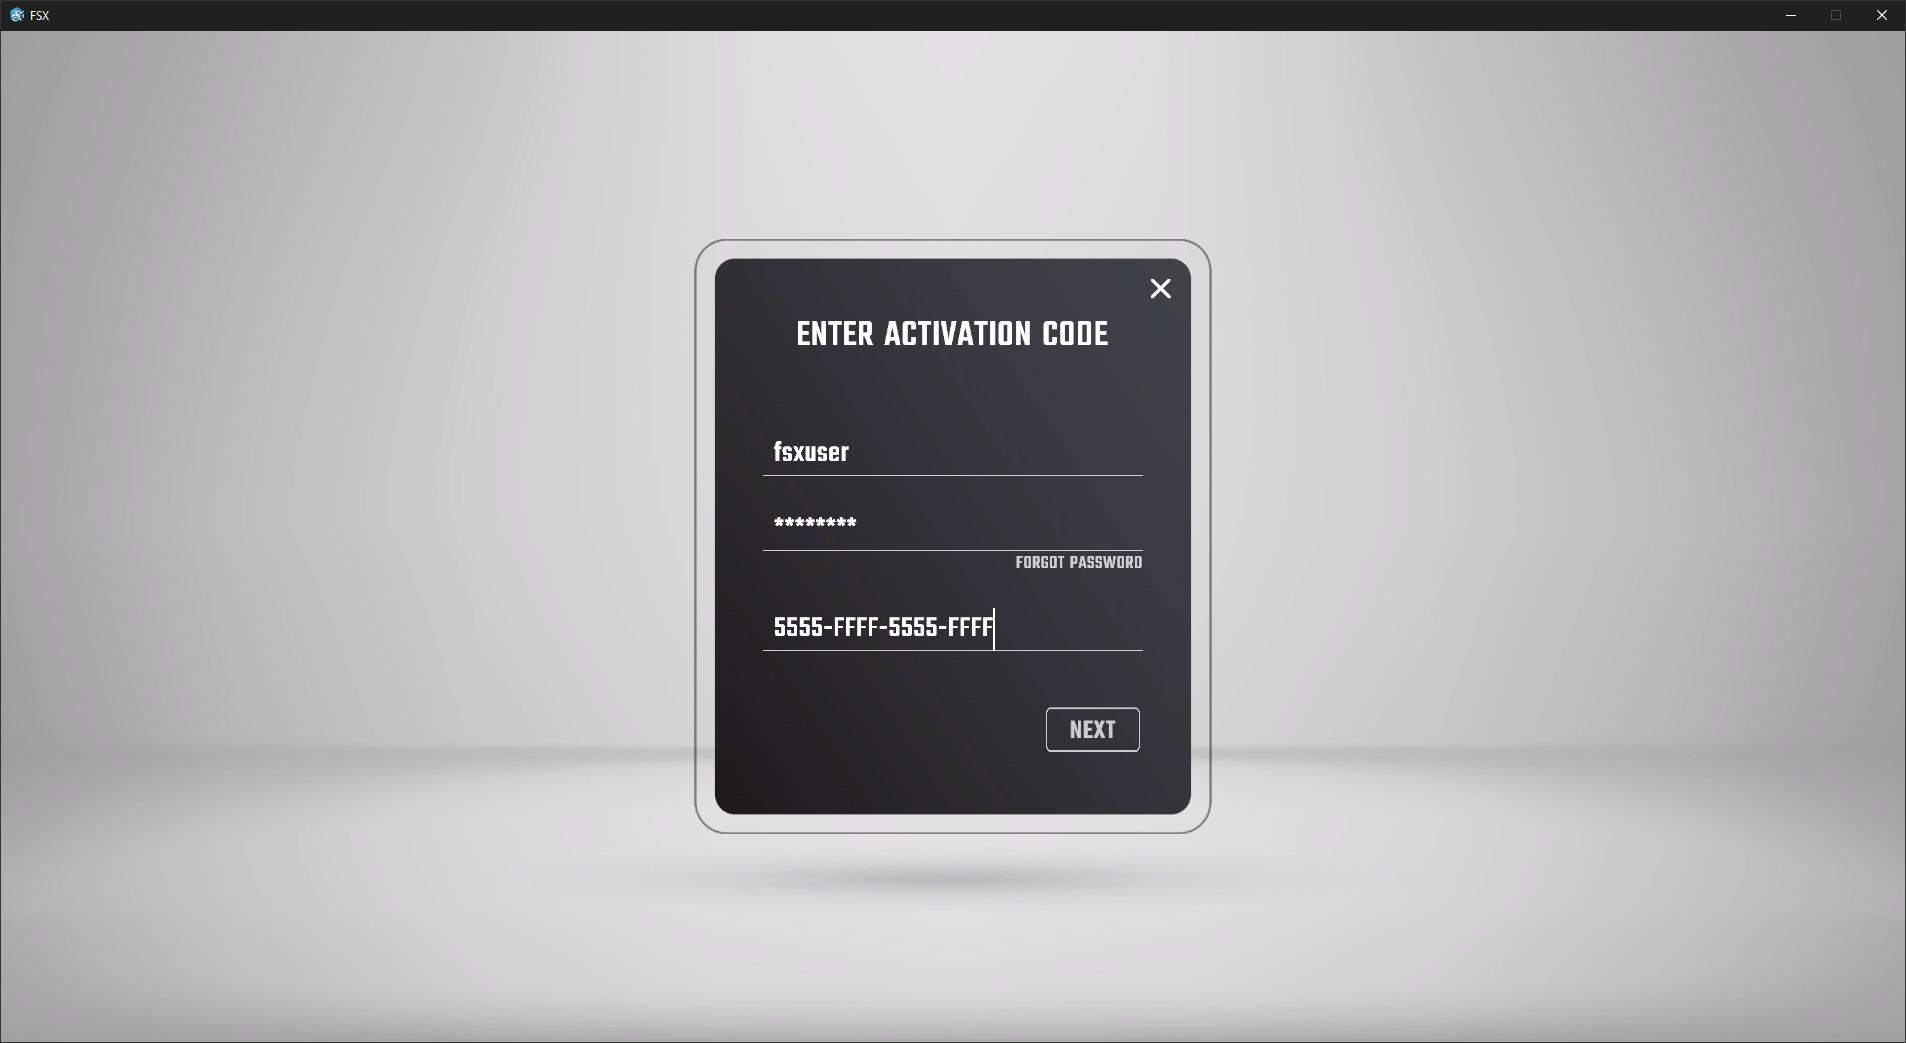 se the FSX 2020 activation license and the provided FSX Live login